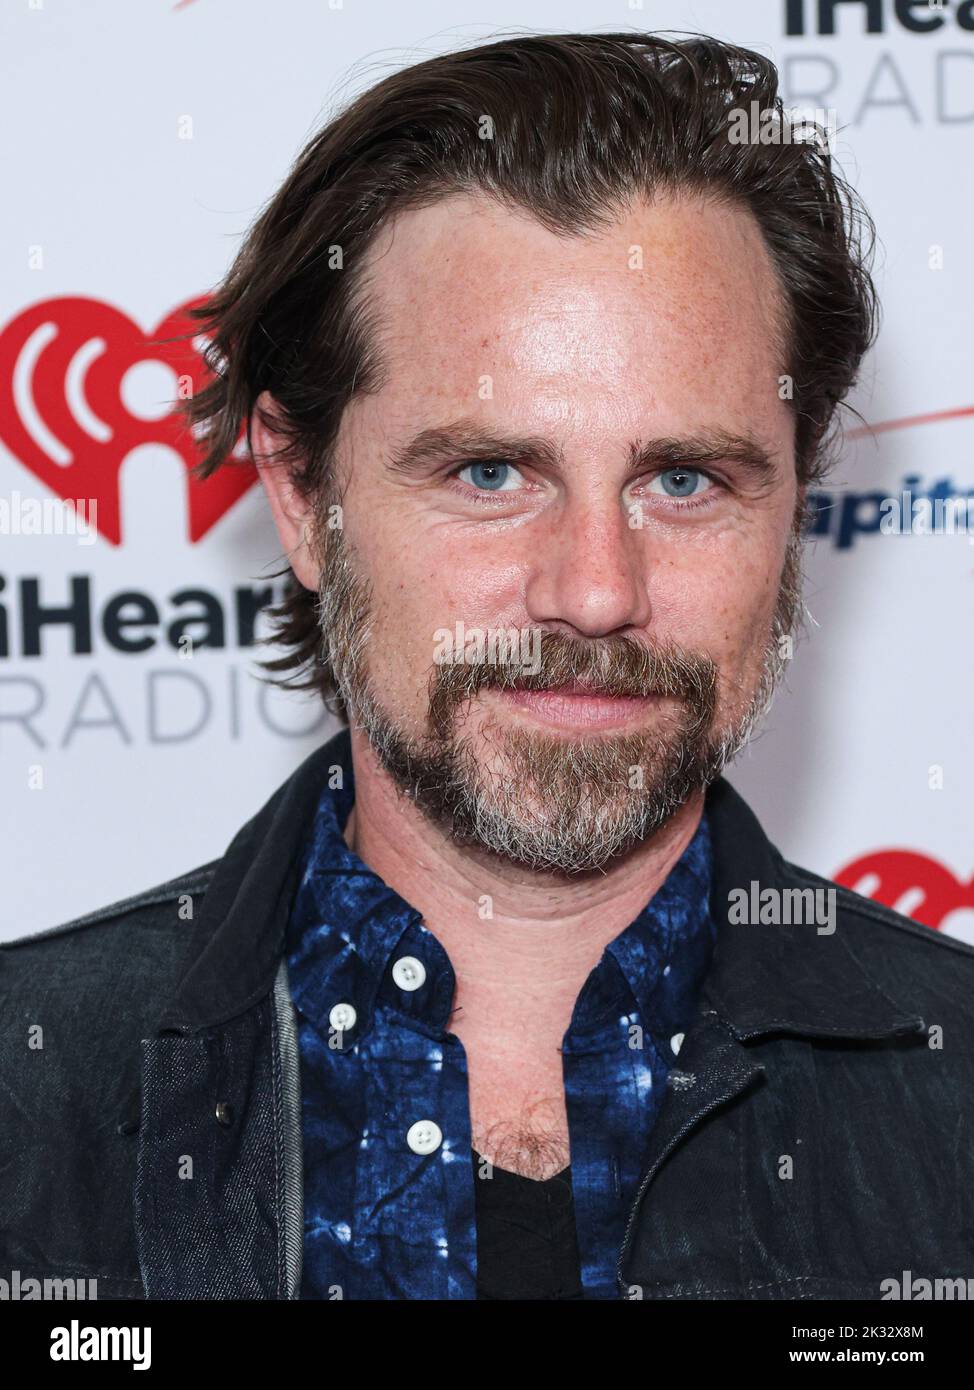 LAS VEGAS, NEVADA, USA - SEPTEMBER 23: Rider Strong poses in the press room at the 2022 iHeartRadio Music Festival - Night 1 held at the T-Mobile Arena on September 23, 2022 in Las Vegas, Nevada, United States. (Photo by Xavier Collin/Image Press Agency) Stock Photo